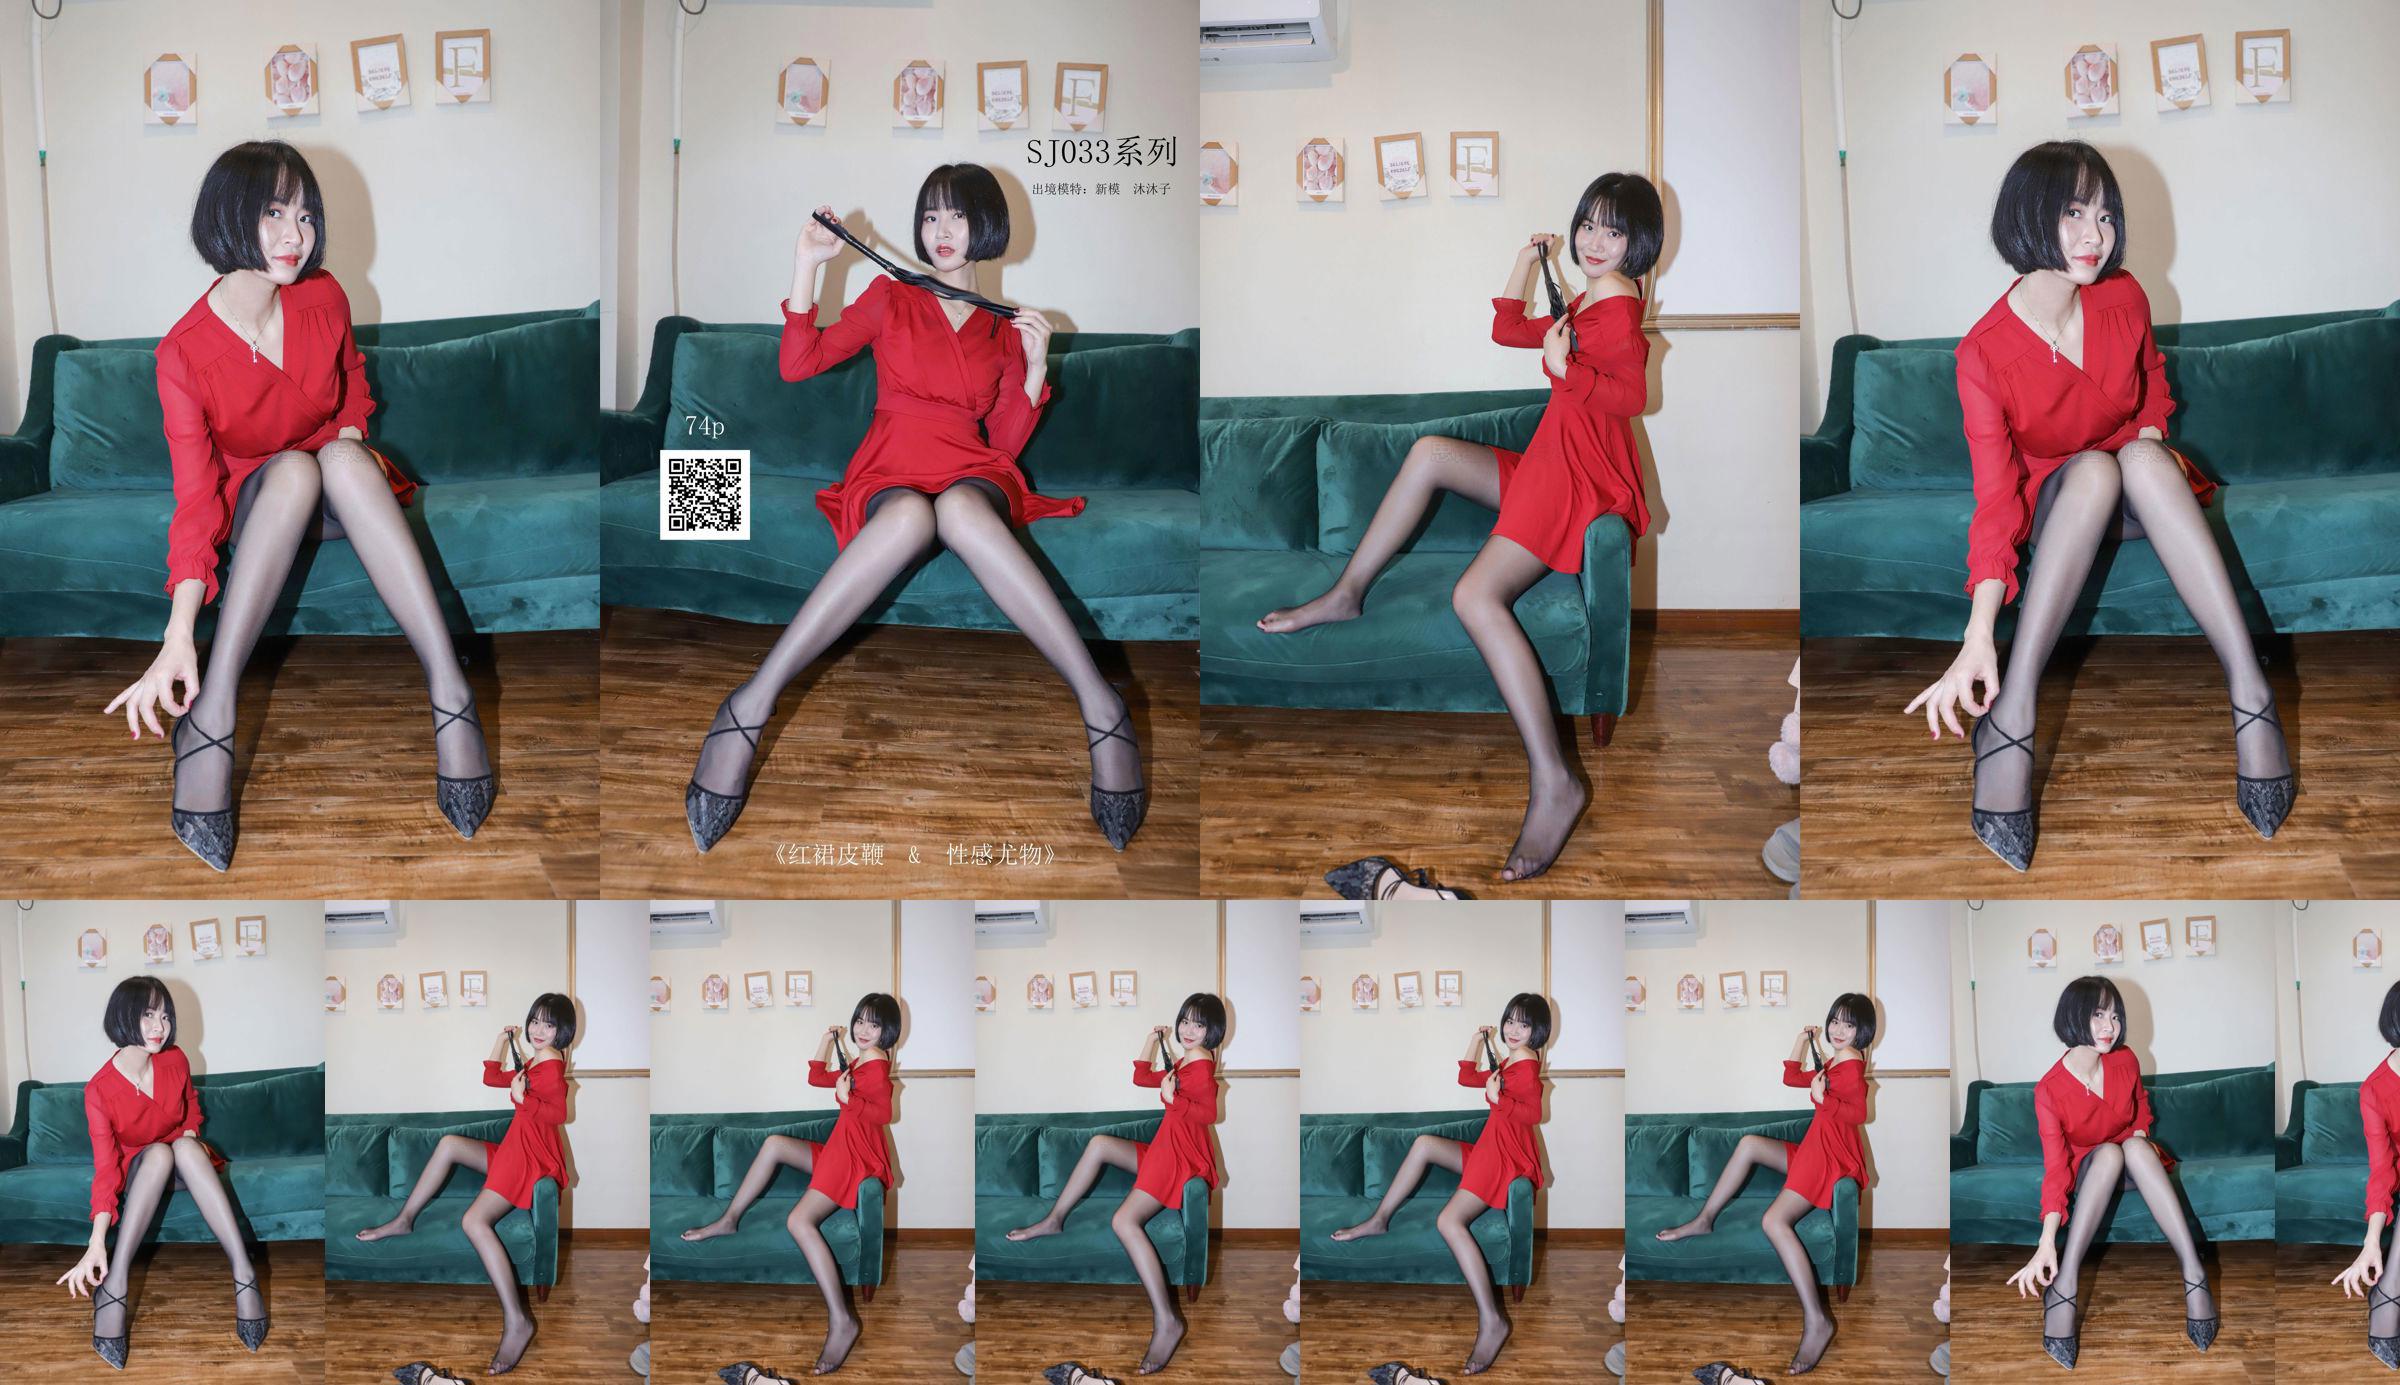 [Thinking words SiHua] SJ033 new model Mu Muzi red skirt leather whip の sexy stunner No.60c3d6 Page 6